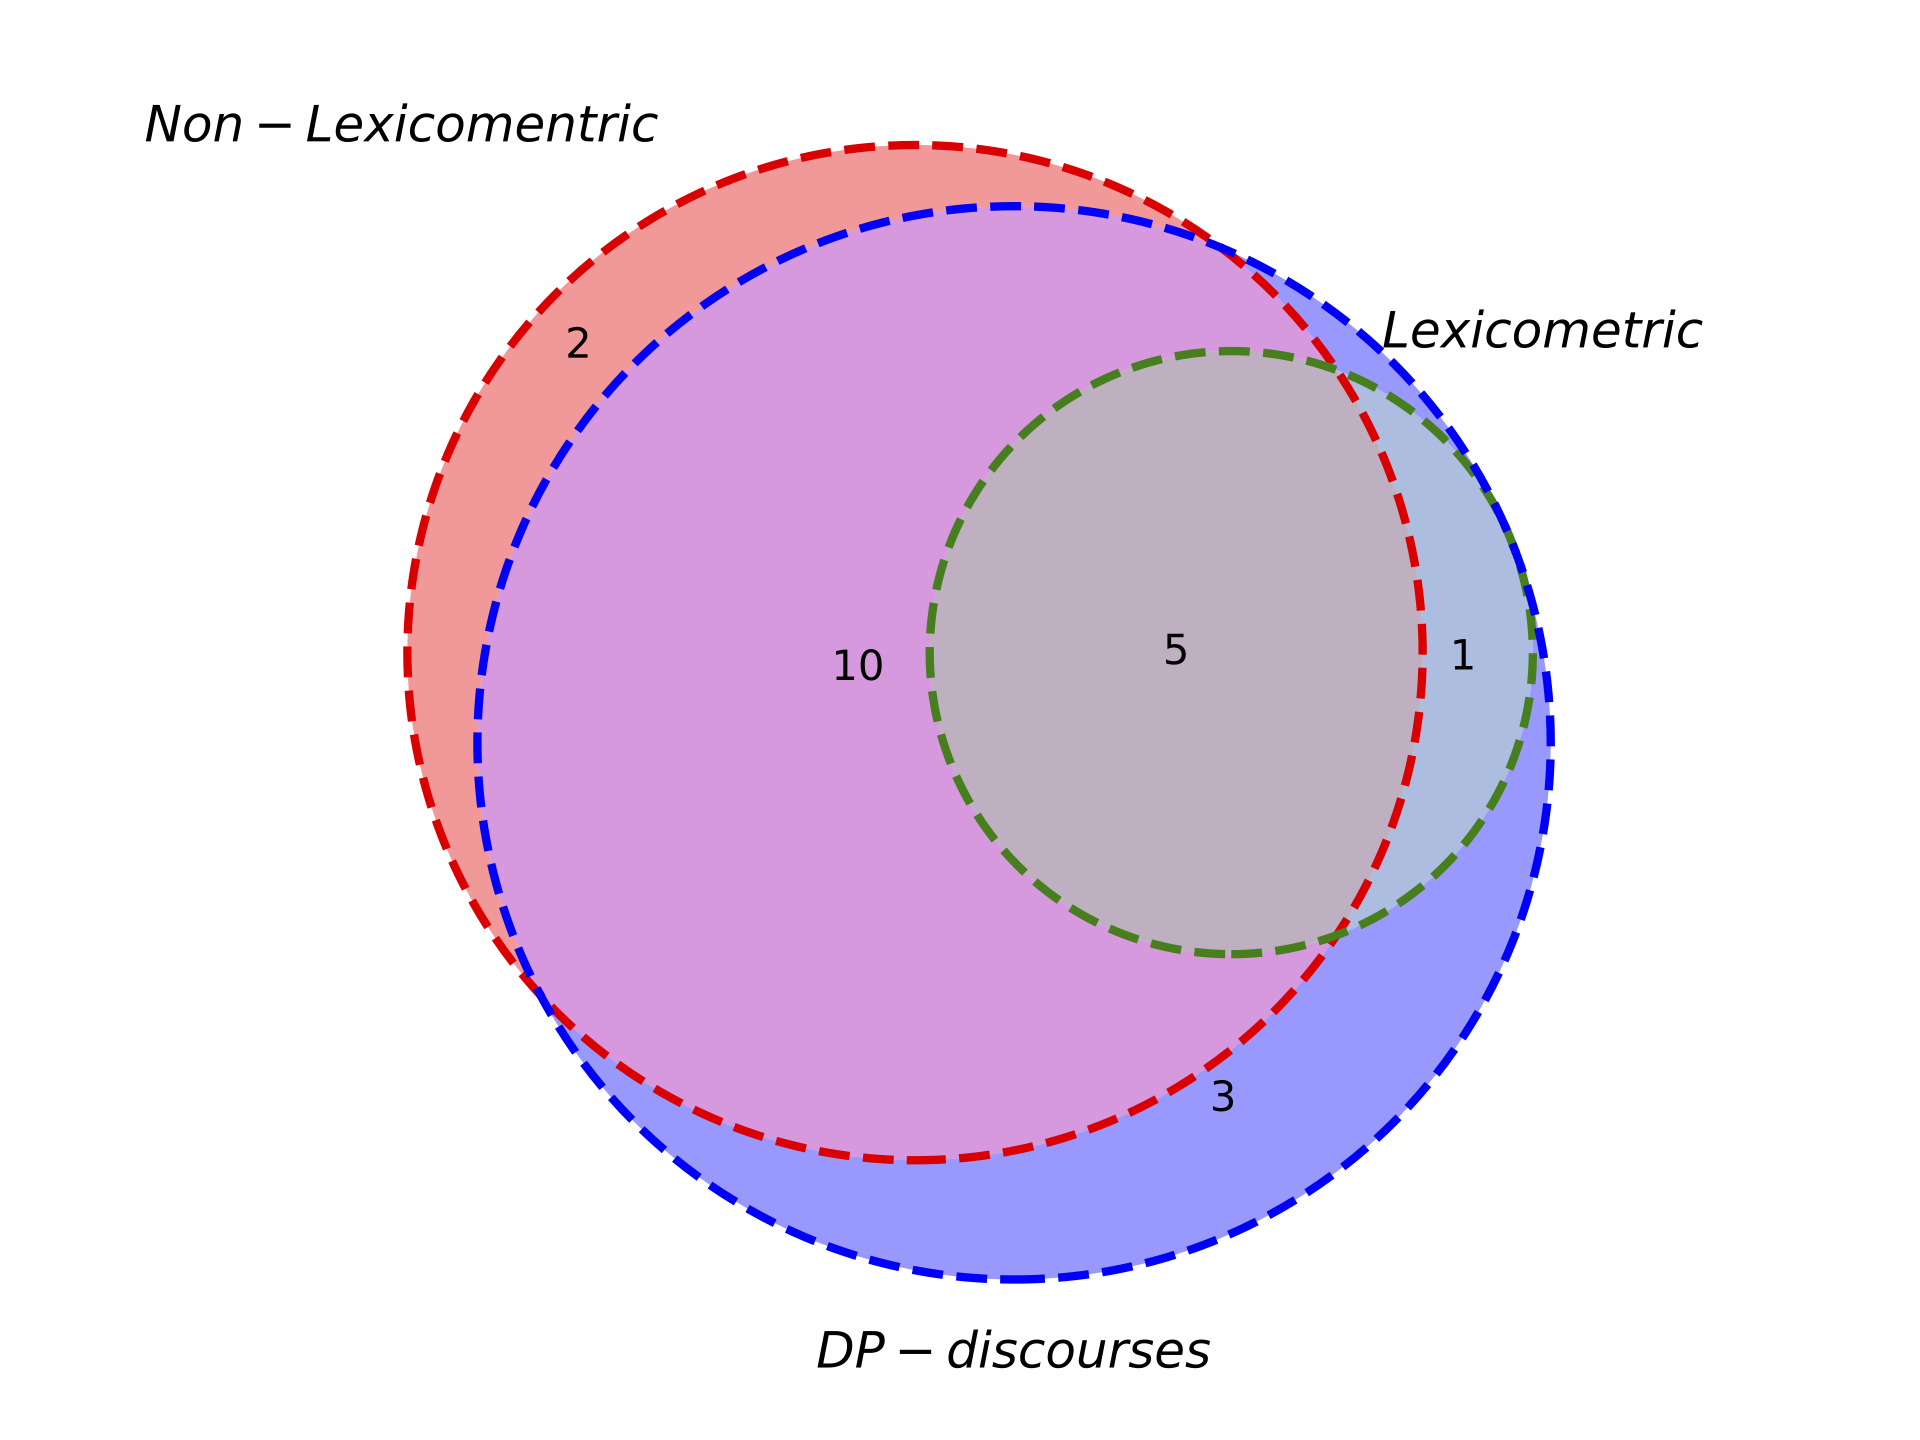 Venn diagram representing the number of discursive strategies found by lexicometric approaches (green circle), non-lexicometric approaches (red circle) and those retrieved using DP-discourses (blue circle).